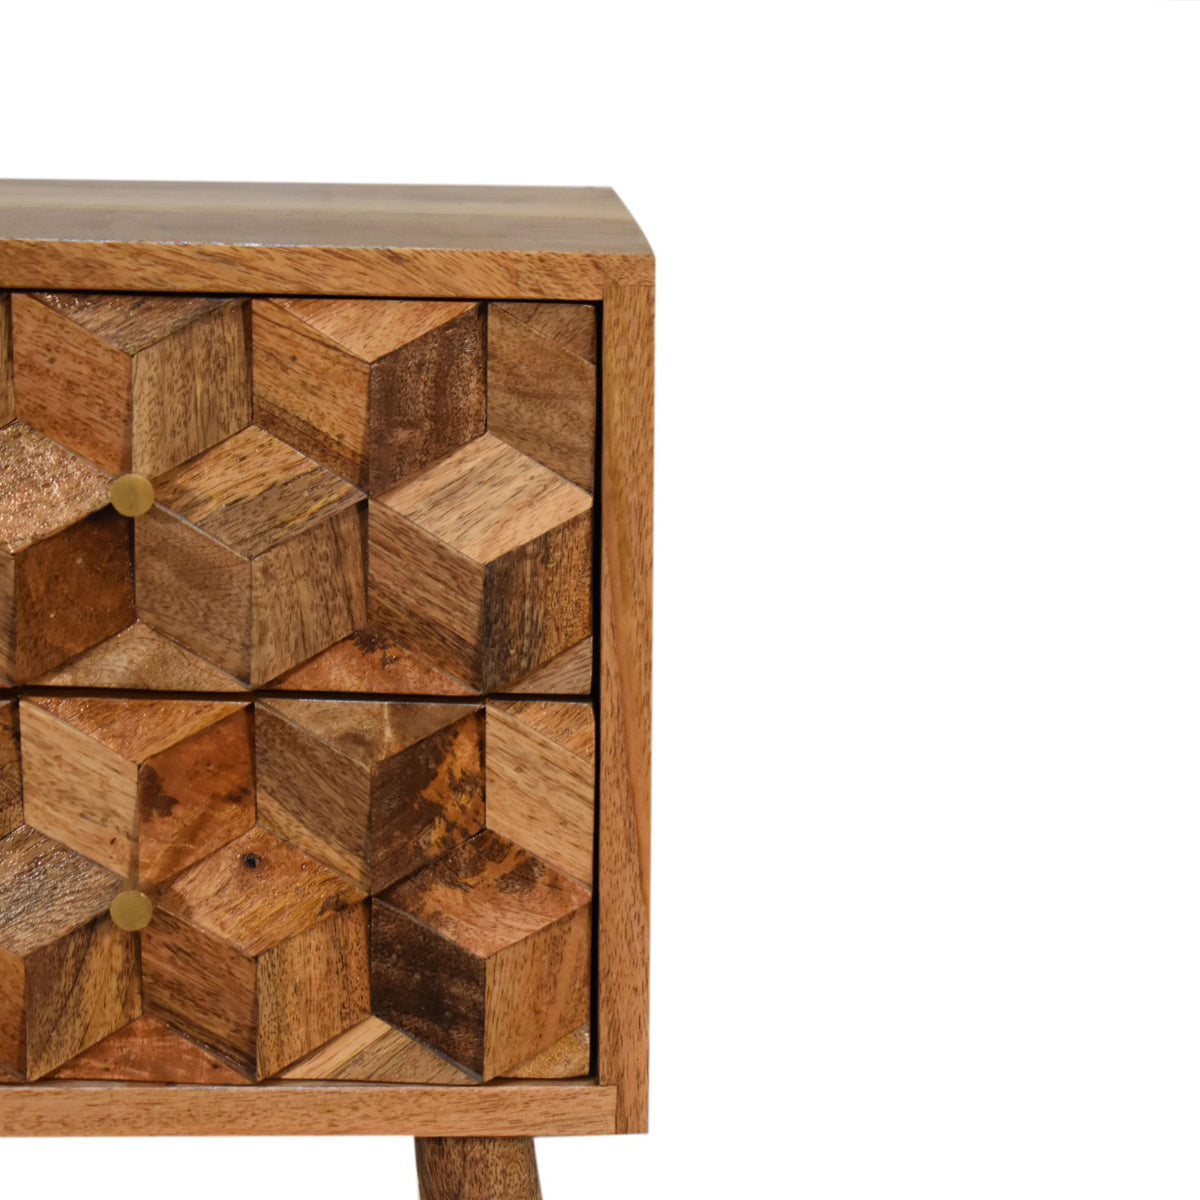 Mini Cube Bedside with Carved Drawers - Oak-ish Finish